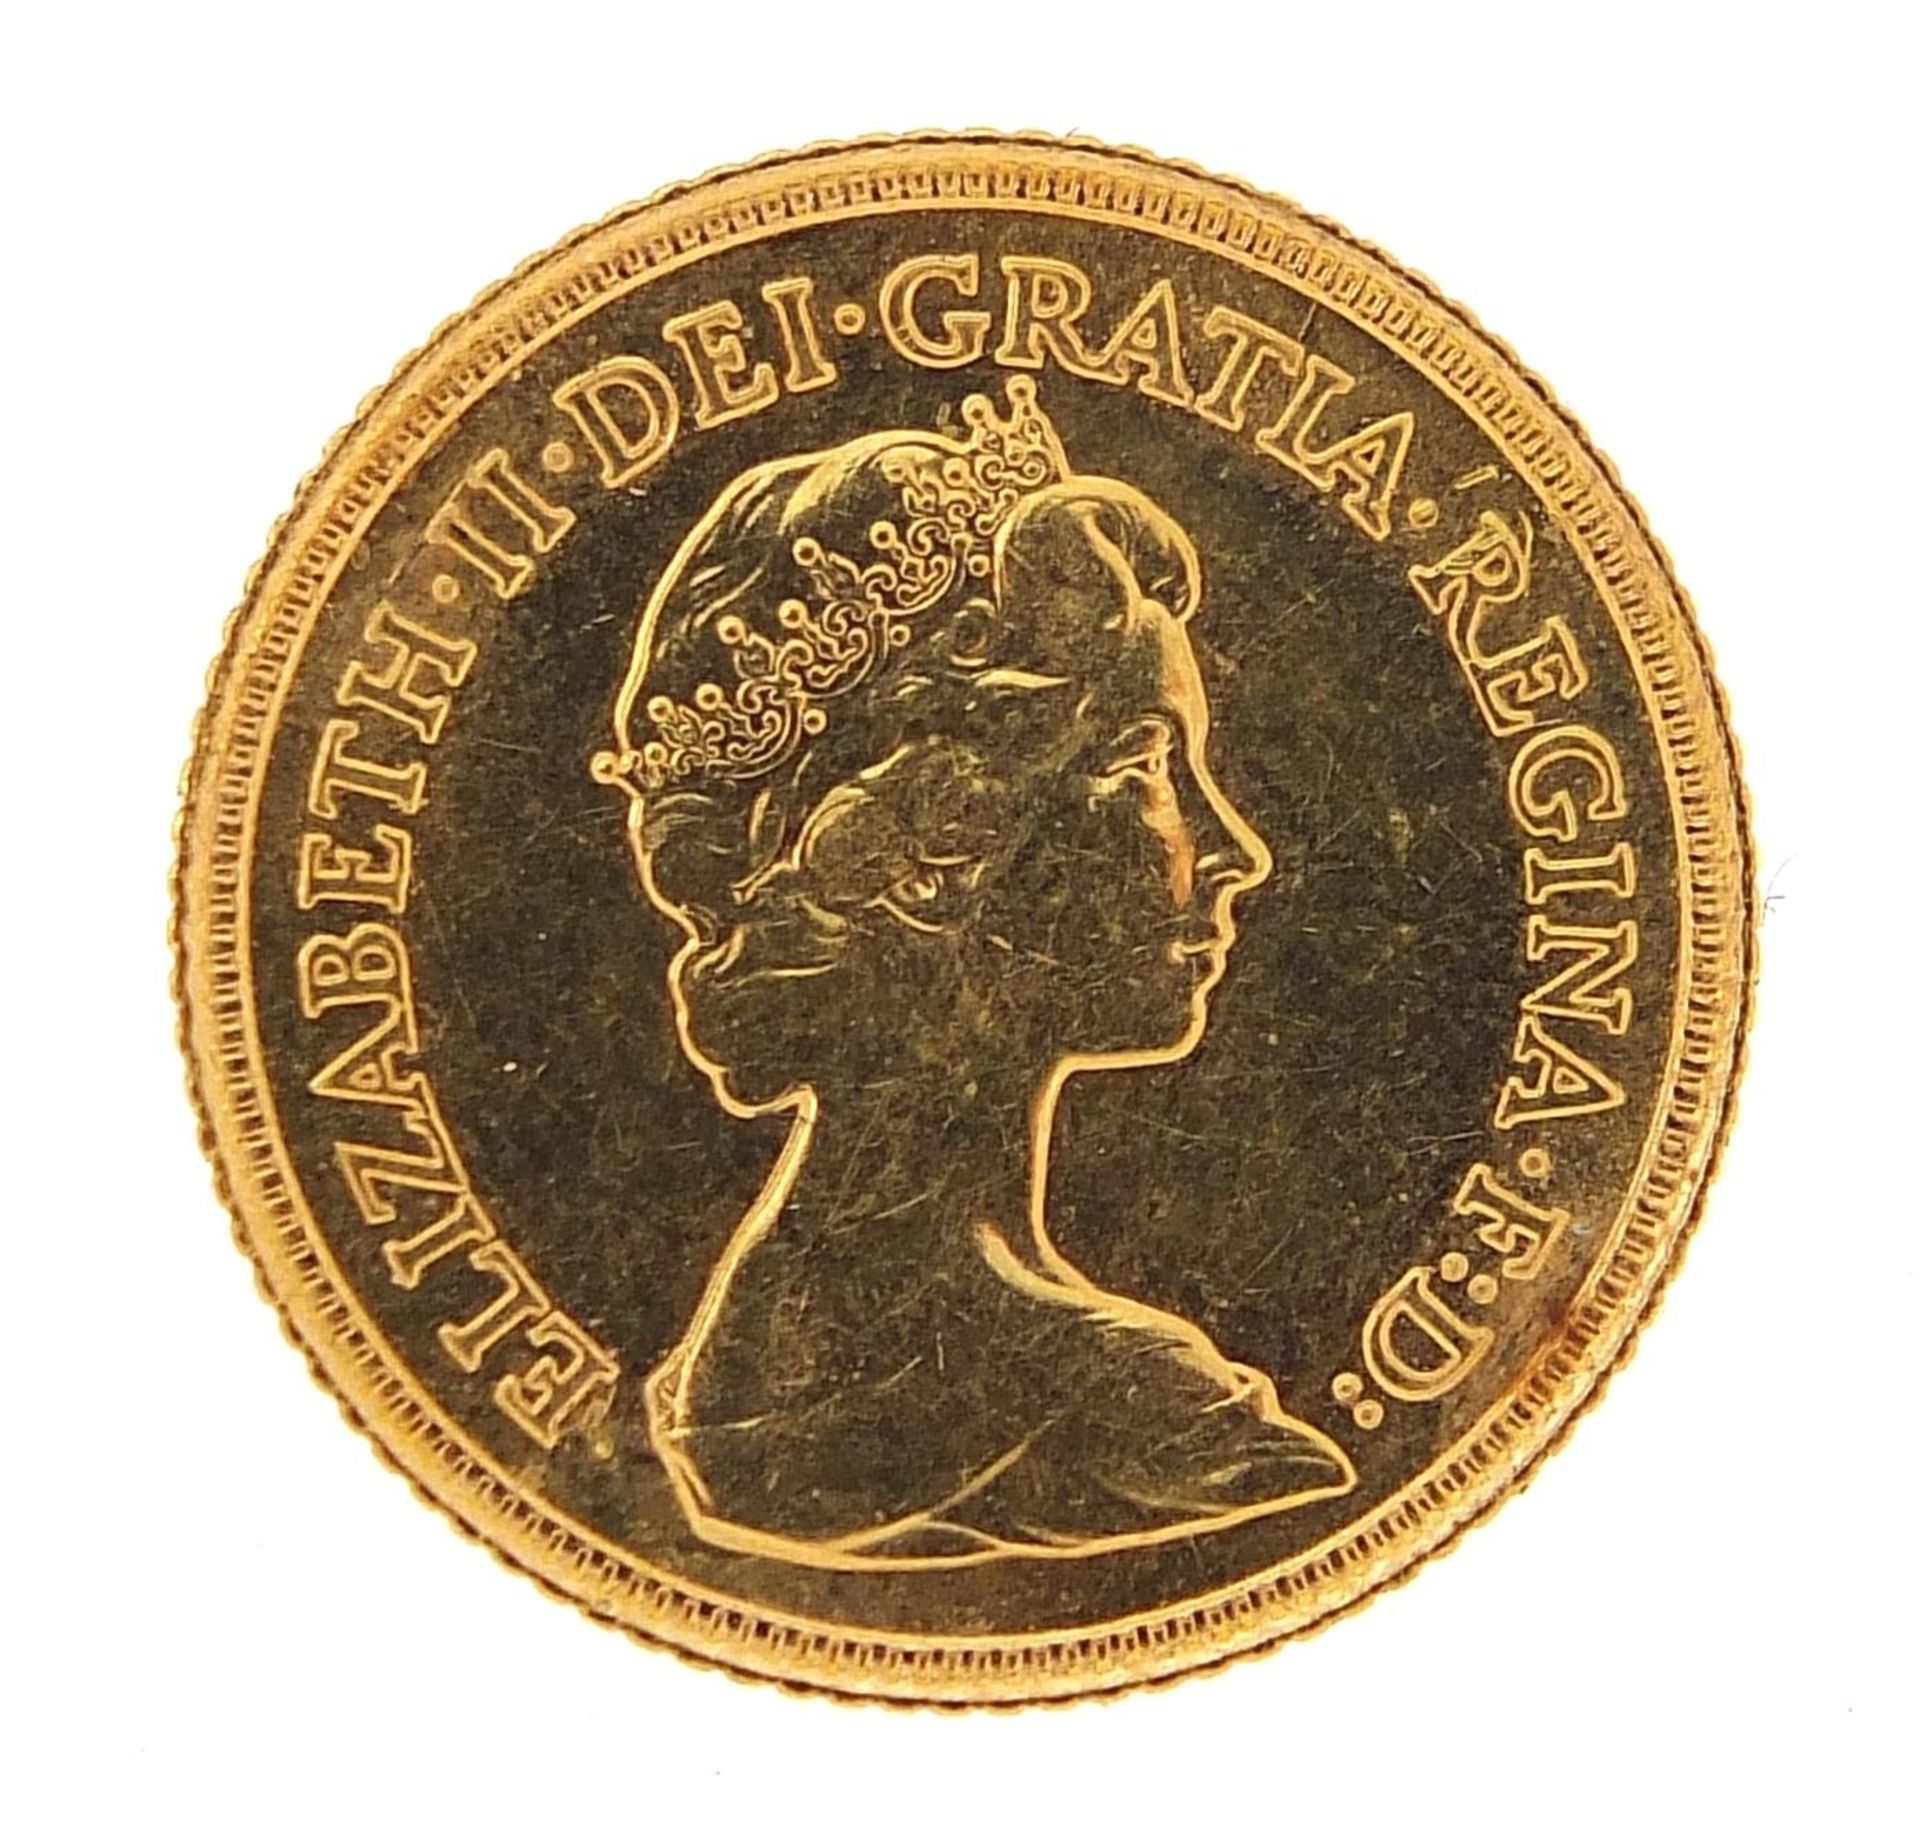 Elizabeth II 1982 gold half sovereign - this lot is sold without buyer's premium - Image 2 of 3